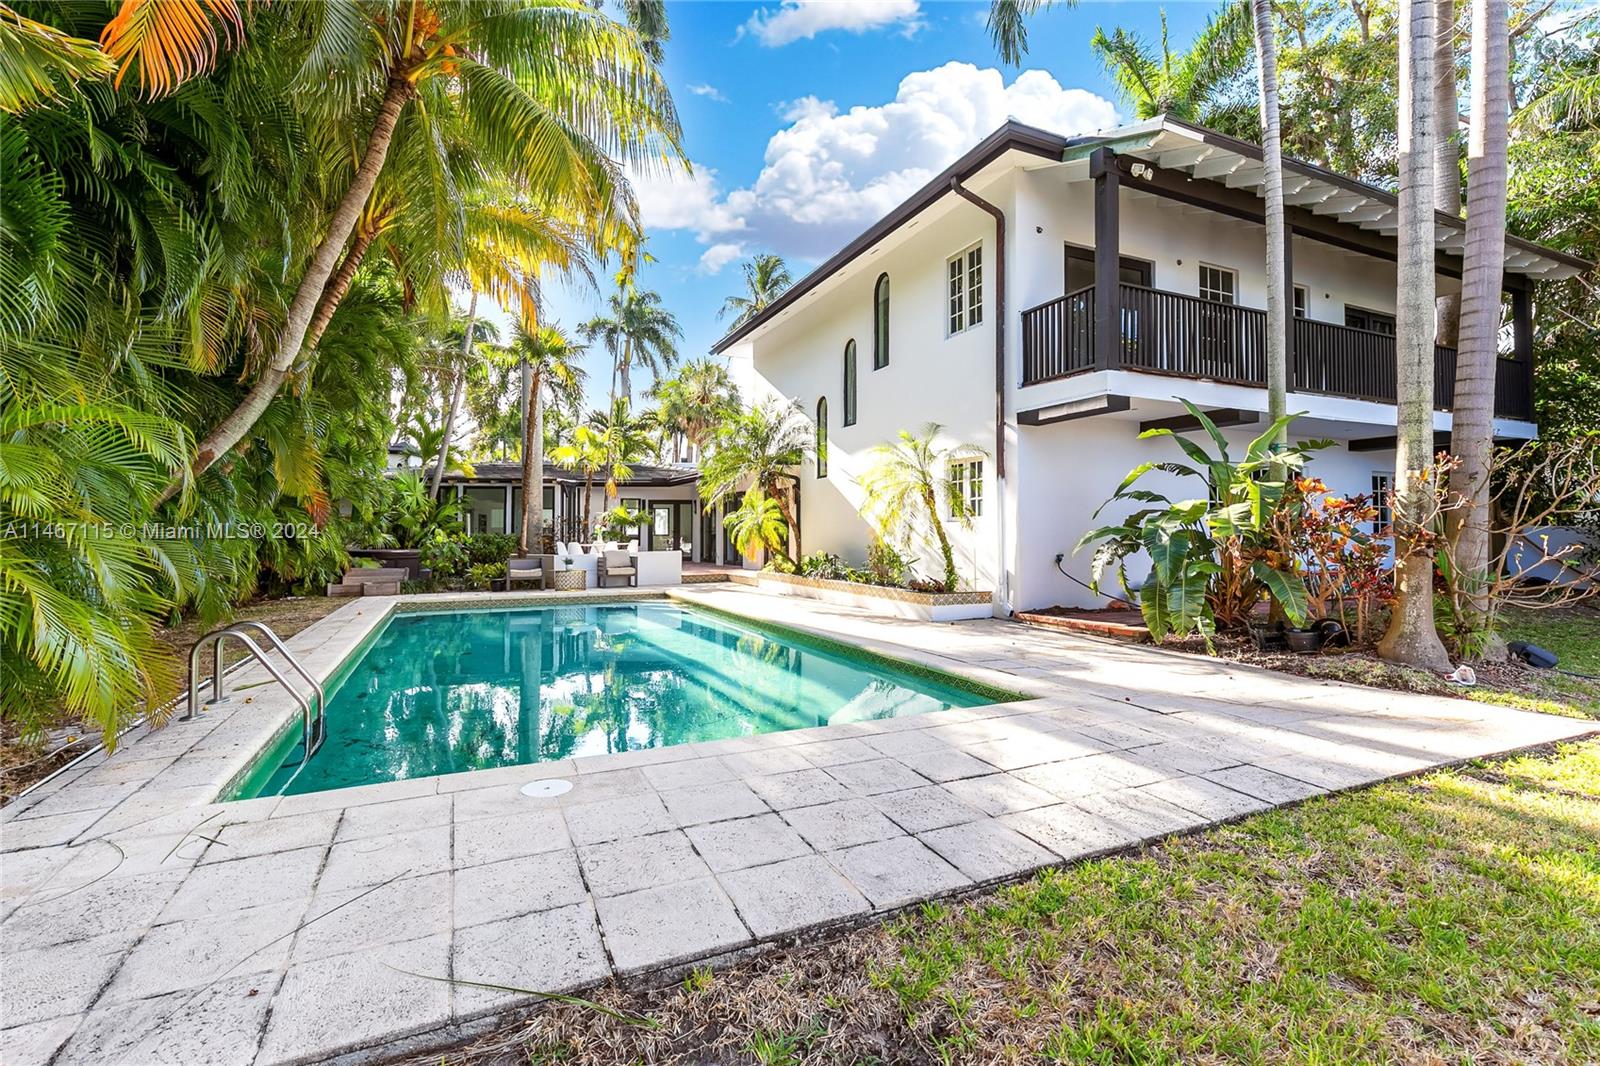 1349 Middle River Dr, Fort Lauderdale, Broward County, Florida - 5 Bedrooms  
6 Bathrooms - 